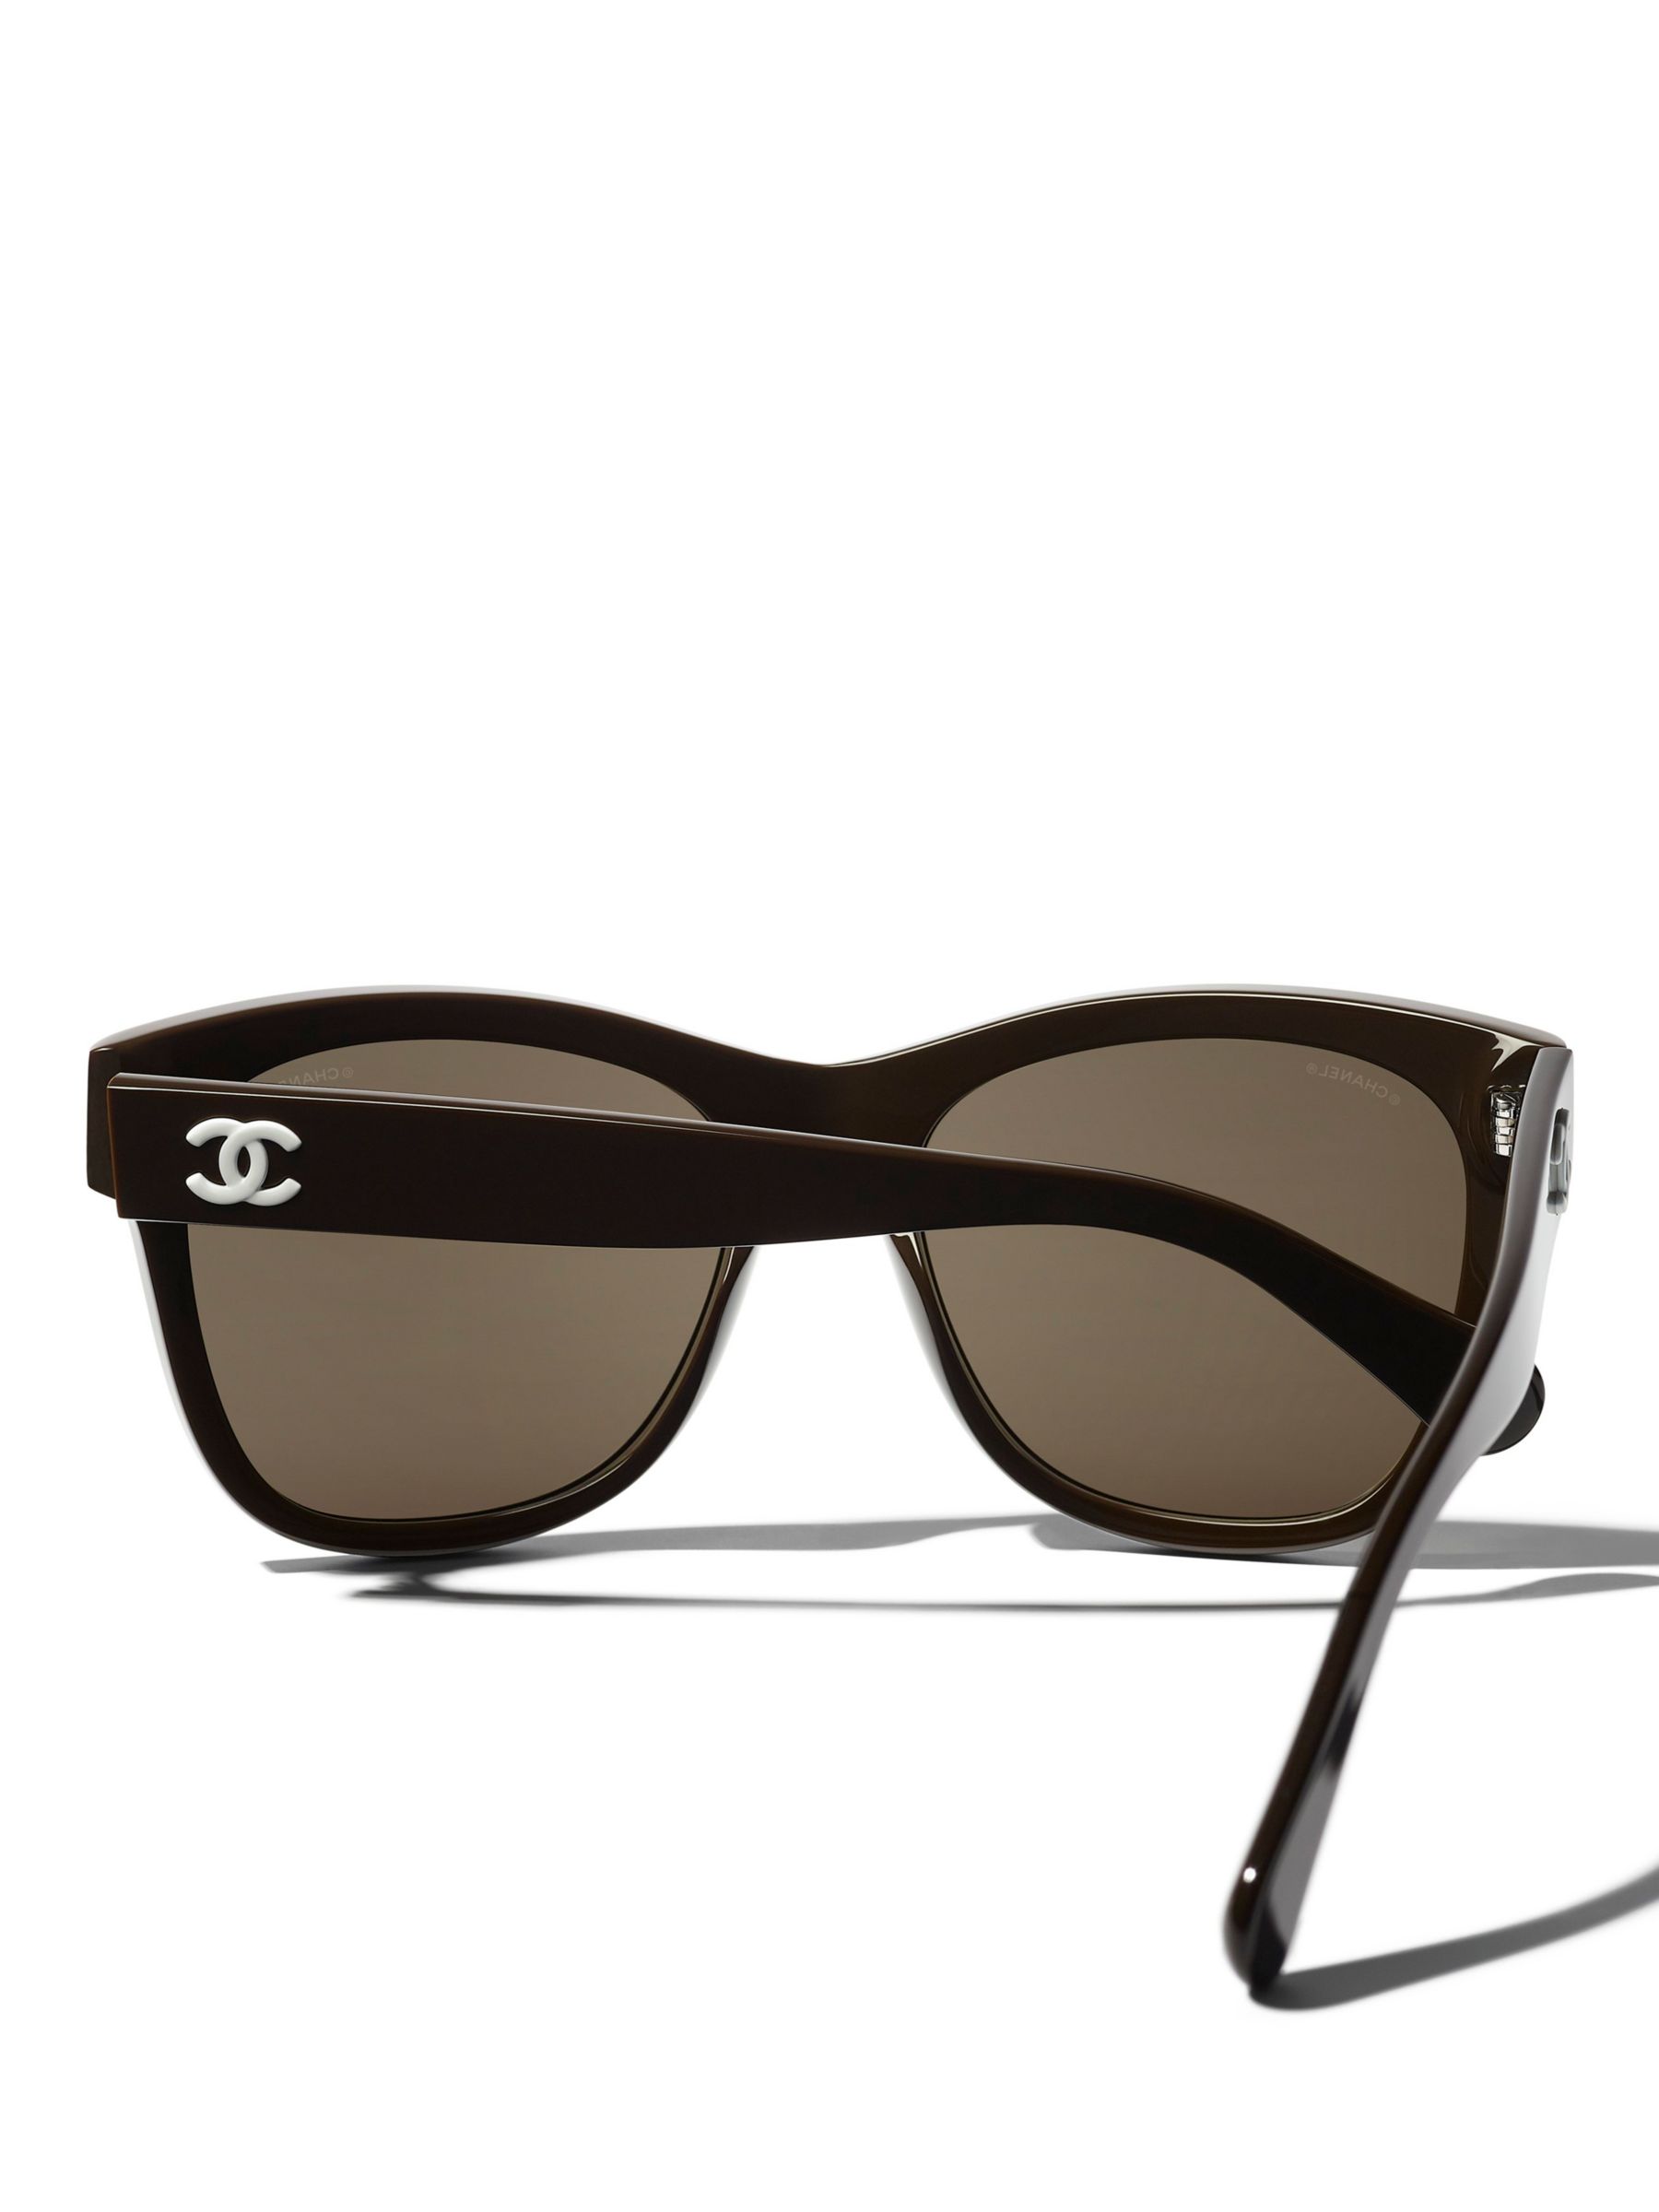 Sunglasses Chanel Brown in Metal - 32285049